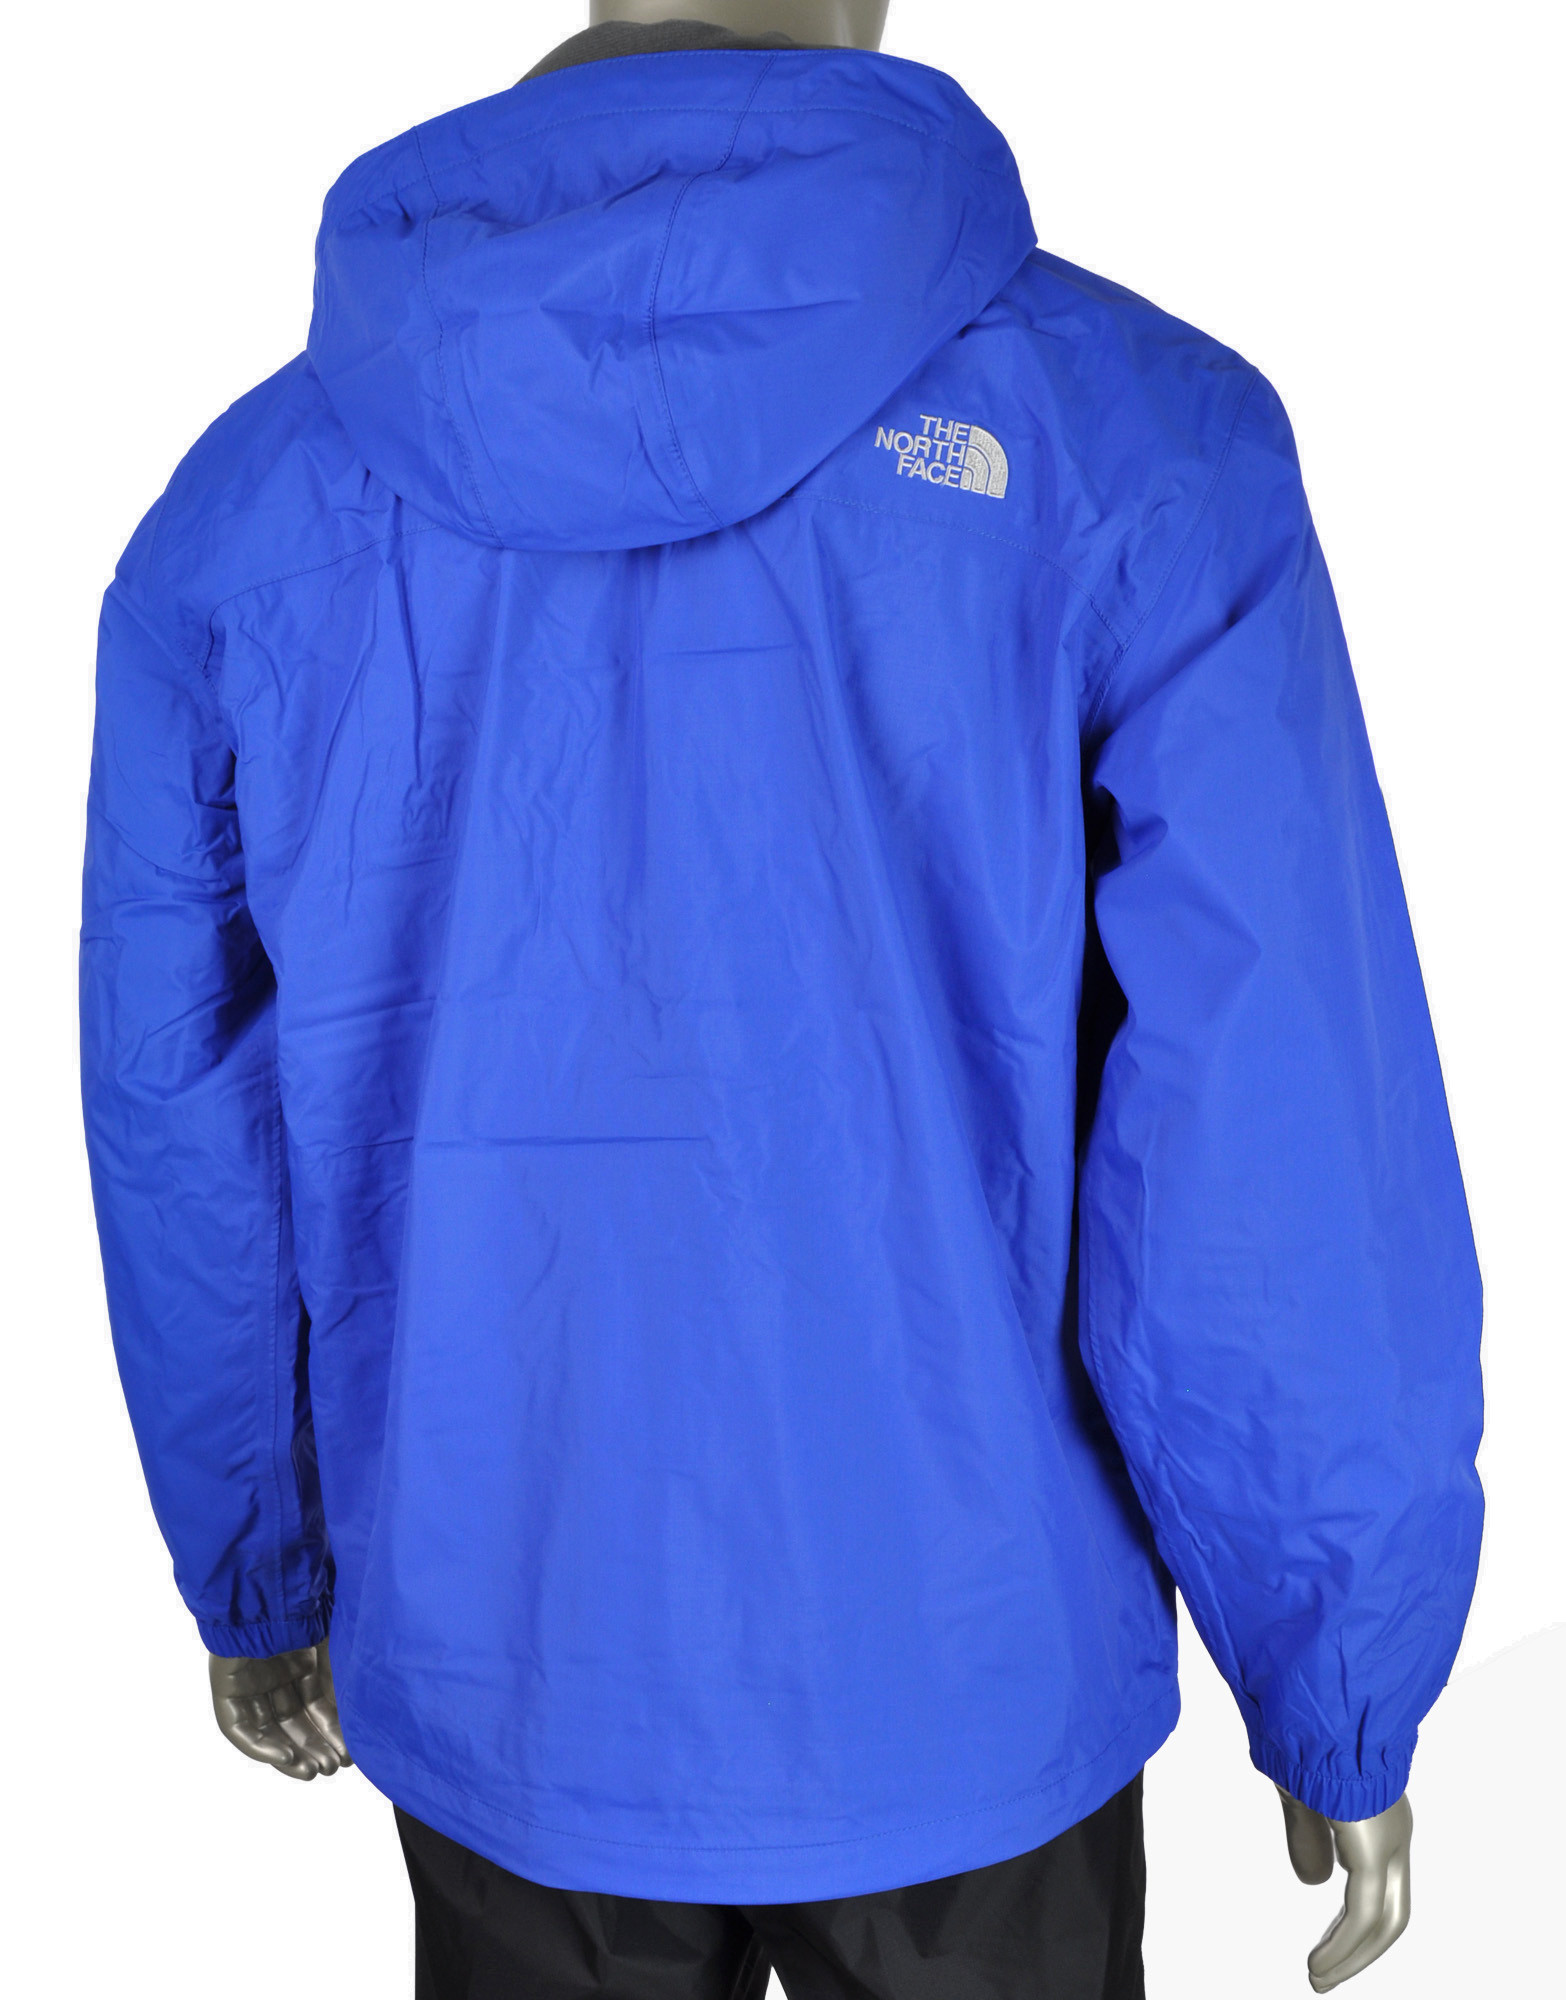 M Resolve Jacket by THE NORTH FACE (colour: blue)